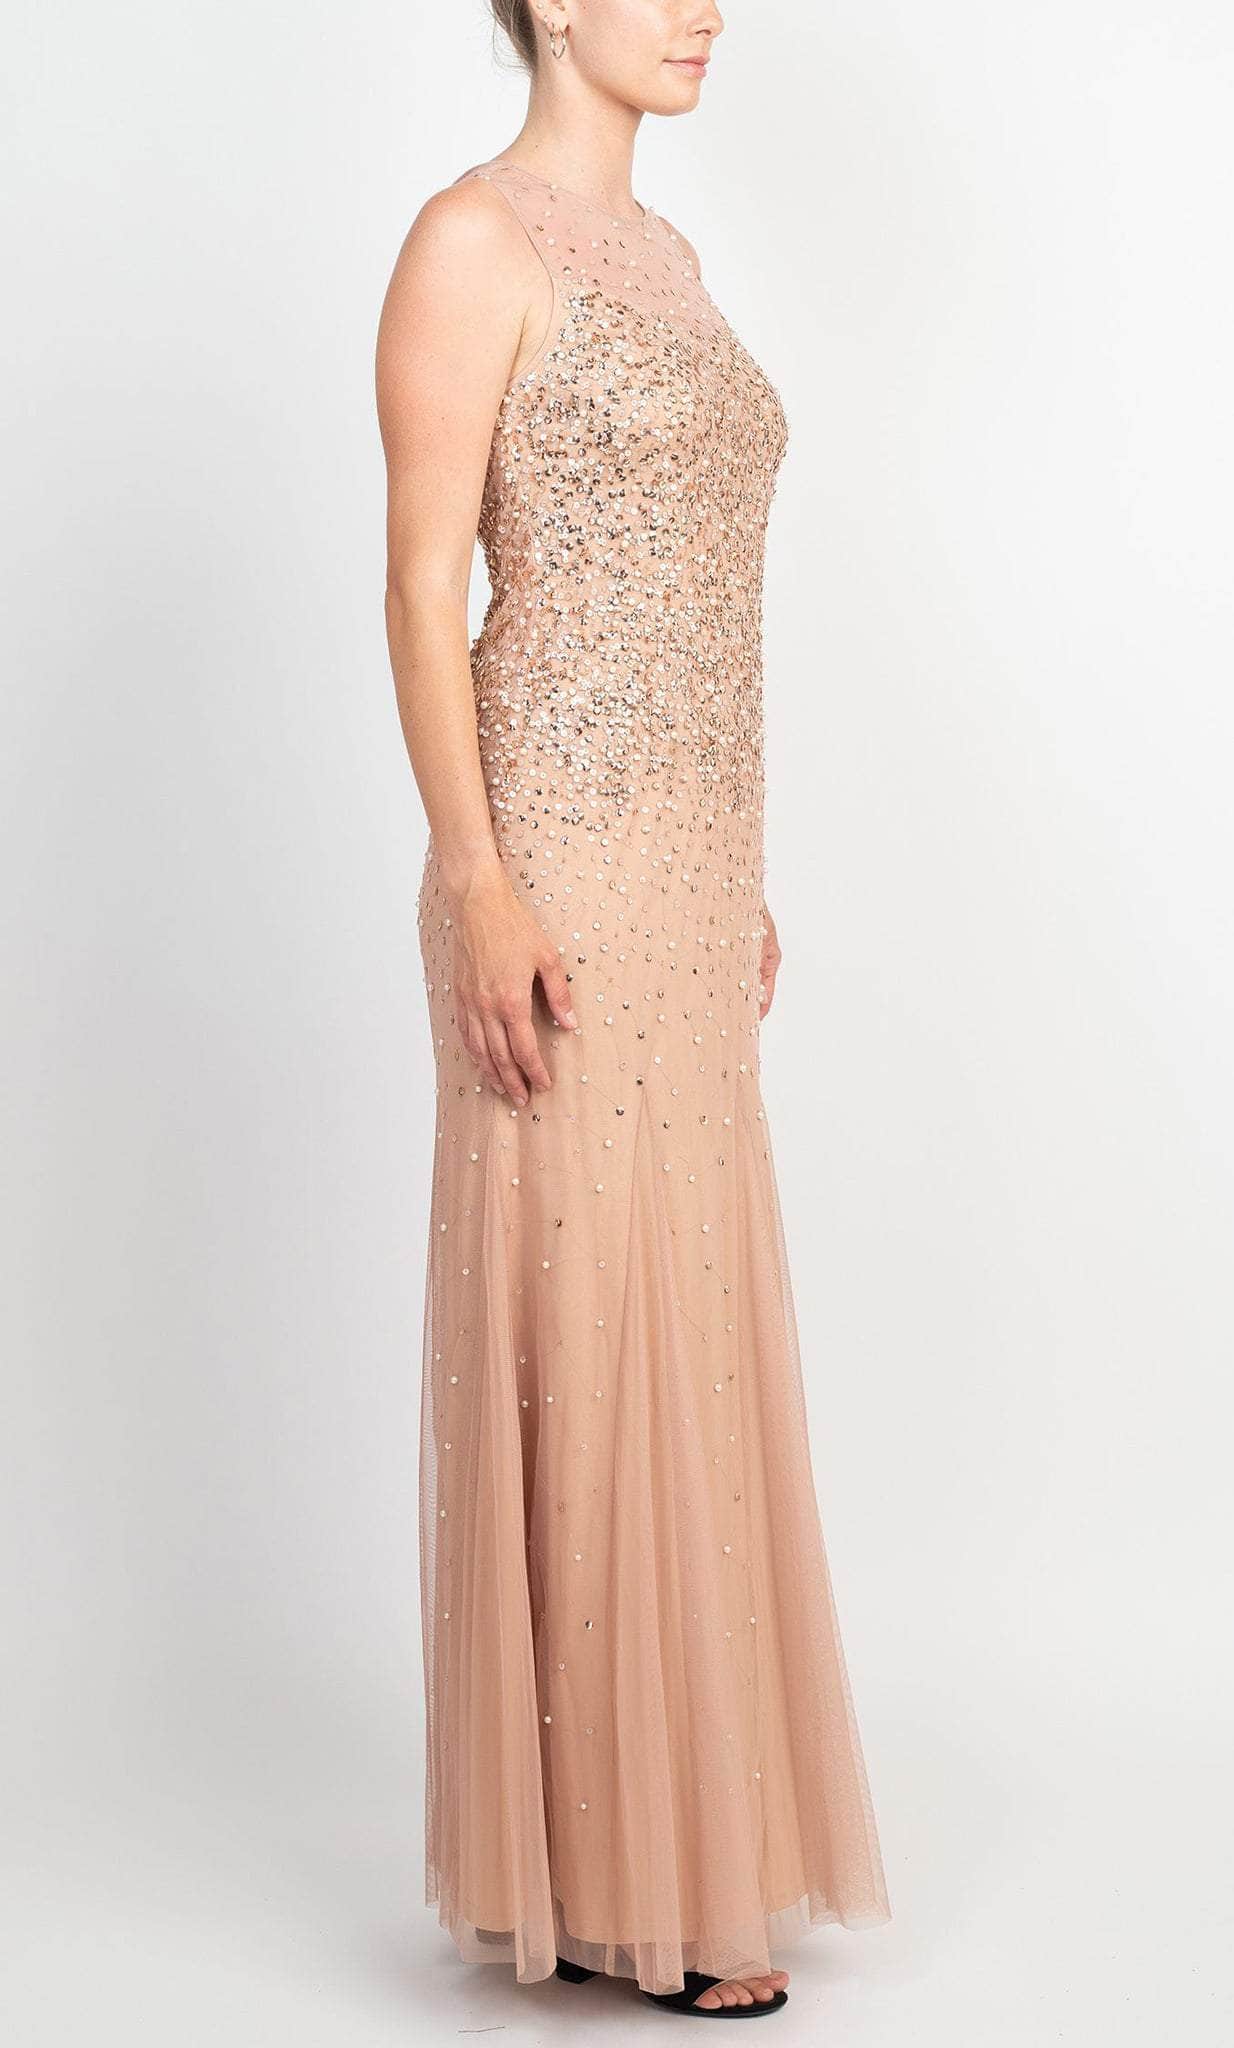 Adrianna Papell AP1E209164 - Illusion Sequined Sleeveless Gown Prom Dresses